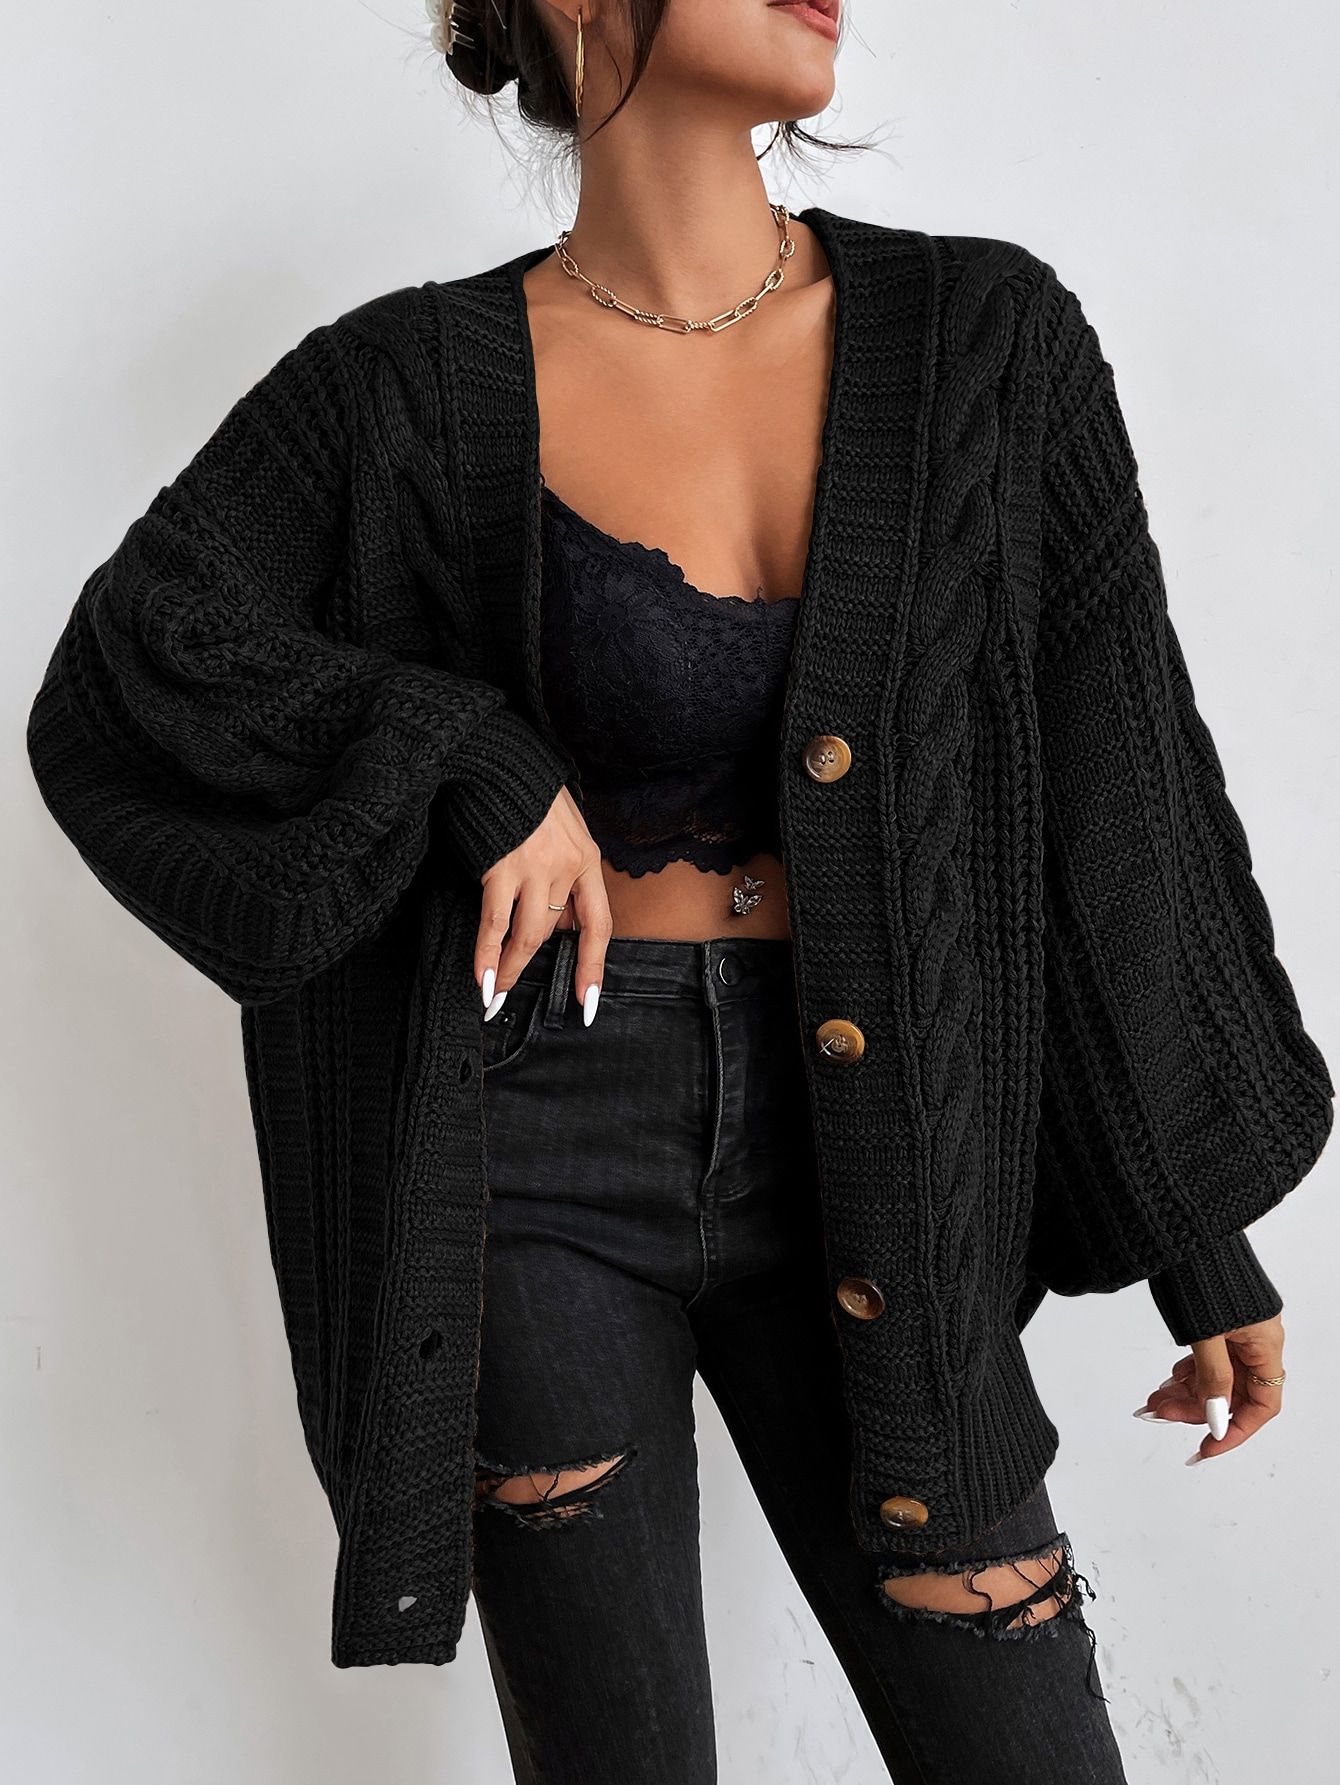 FALL IN LOVE WITH THE MIX OF HIP AND
ROYAL WORLD OF BLACK CARDIGAN.